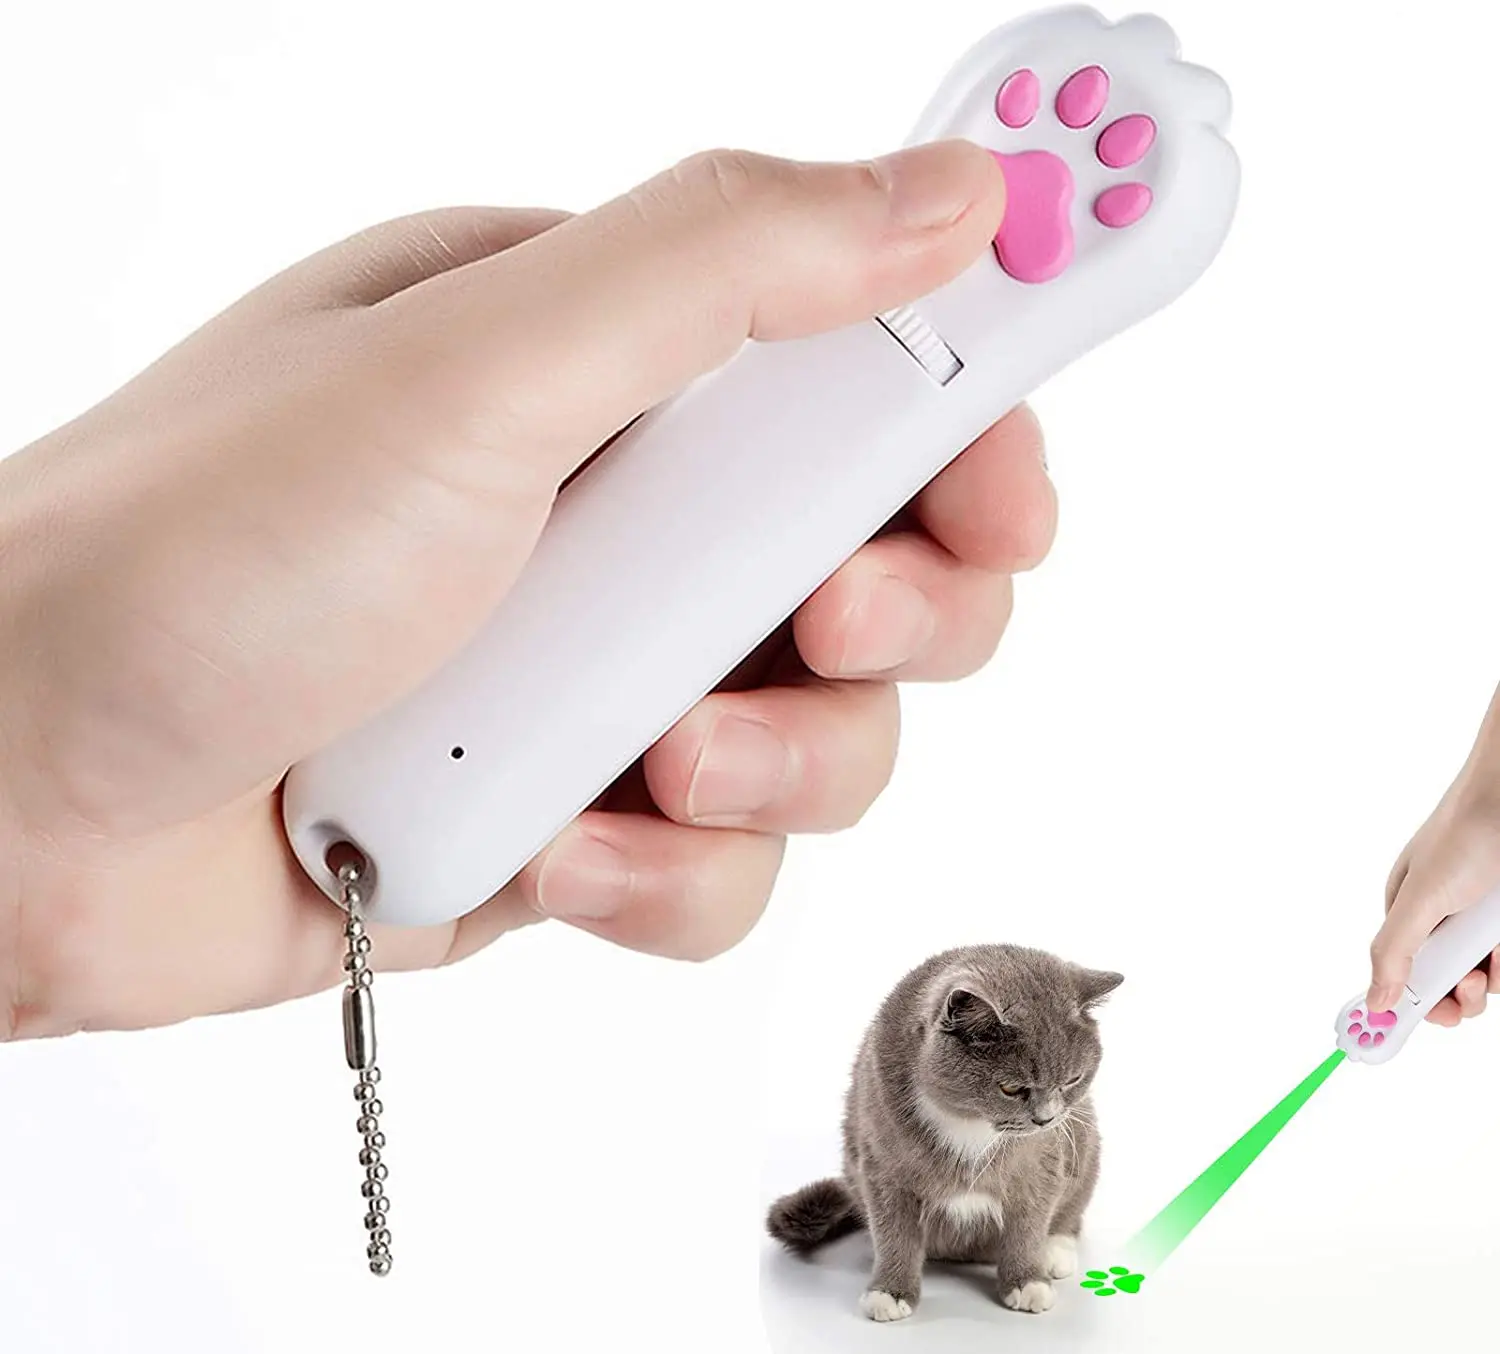 

7 in 1 Cat laser pointer USB recharge cat laser toy LED Red Dot Laser Pointer Interactive Cat Chaser Toy with Patterns and UV, White/pink/black/yellow